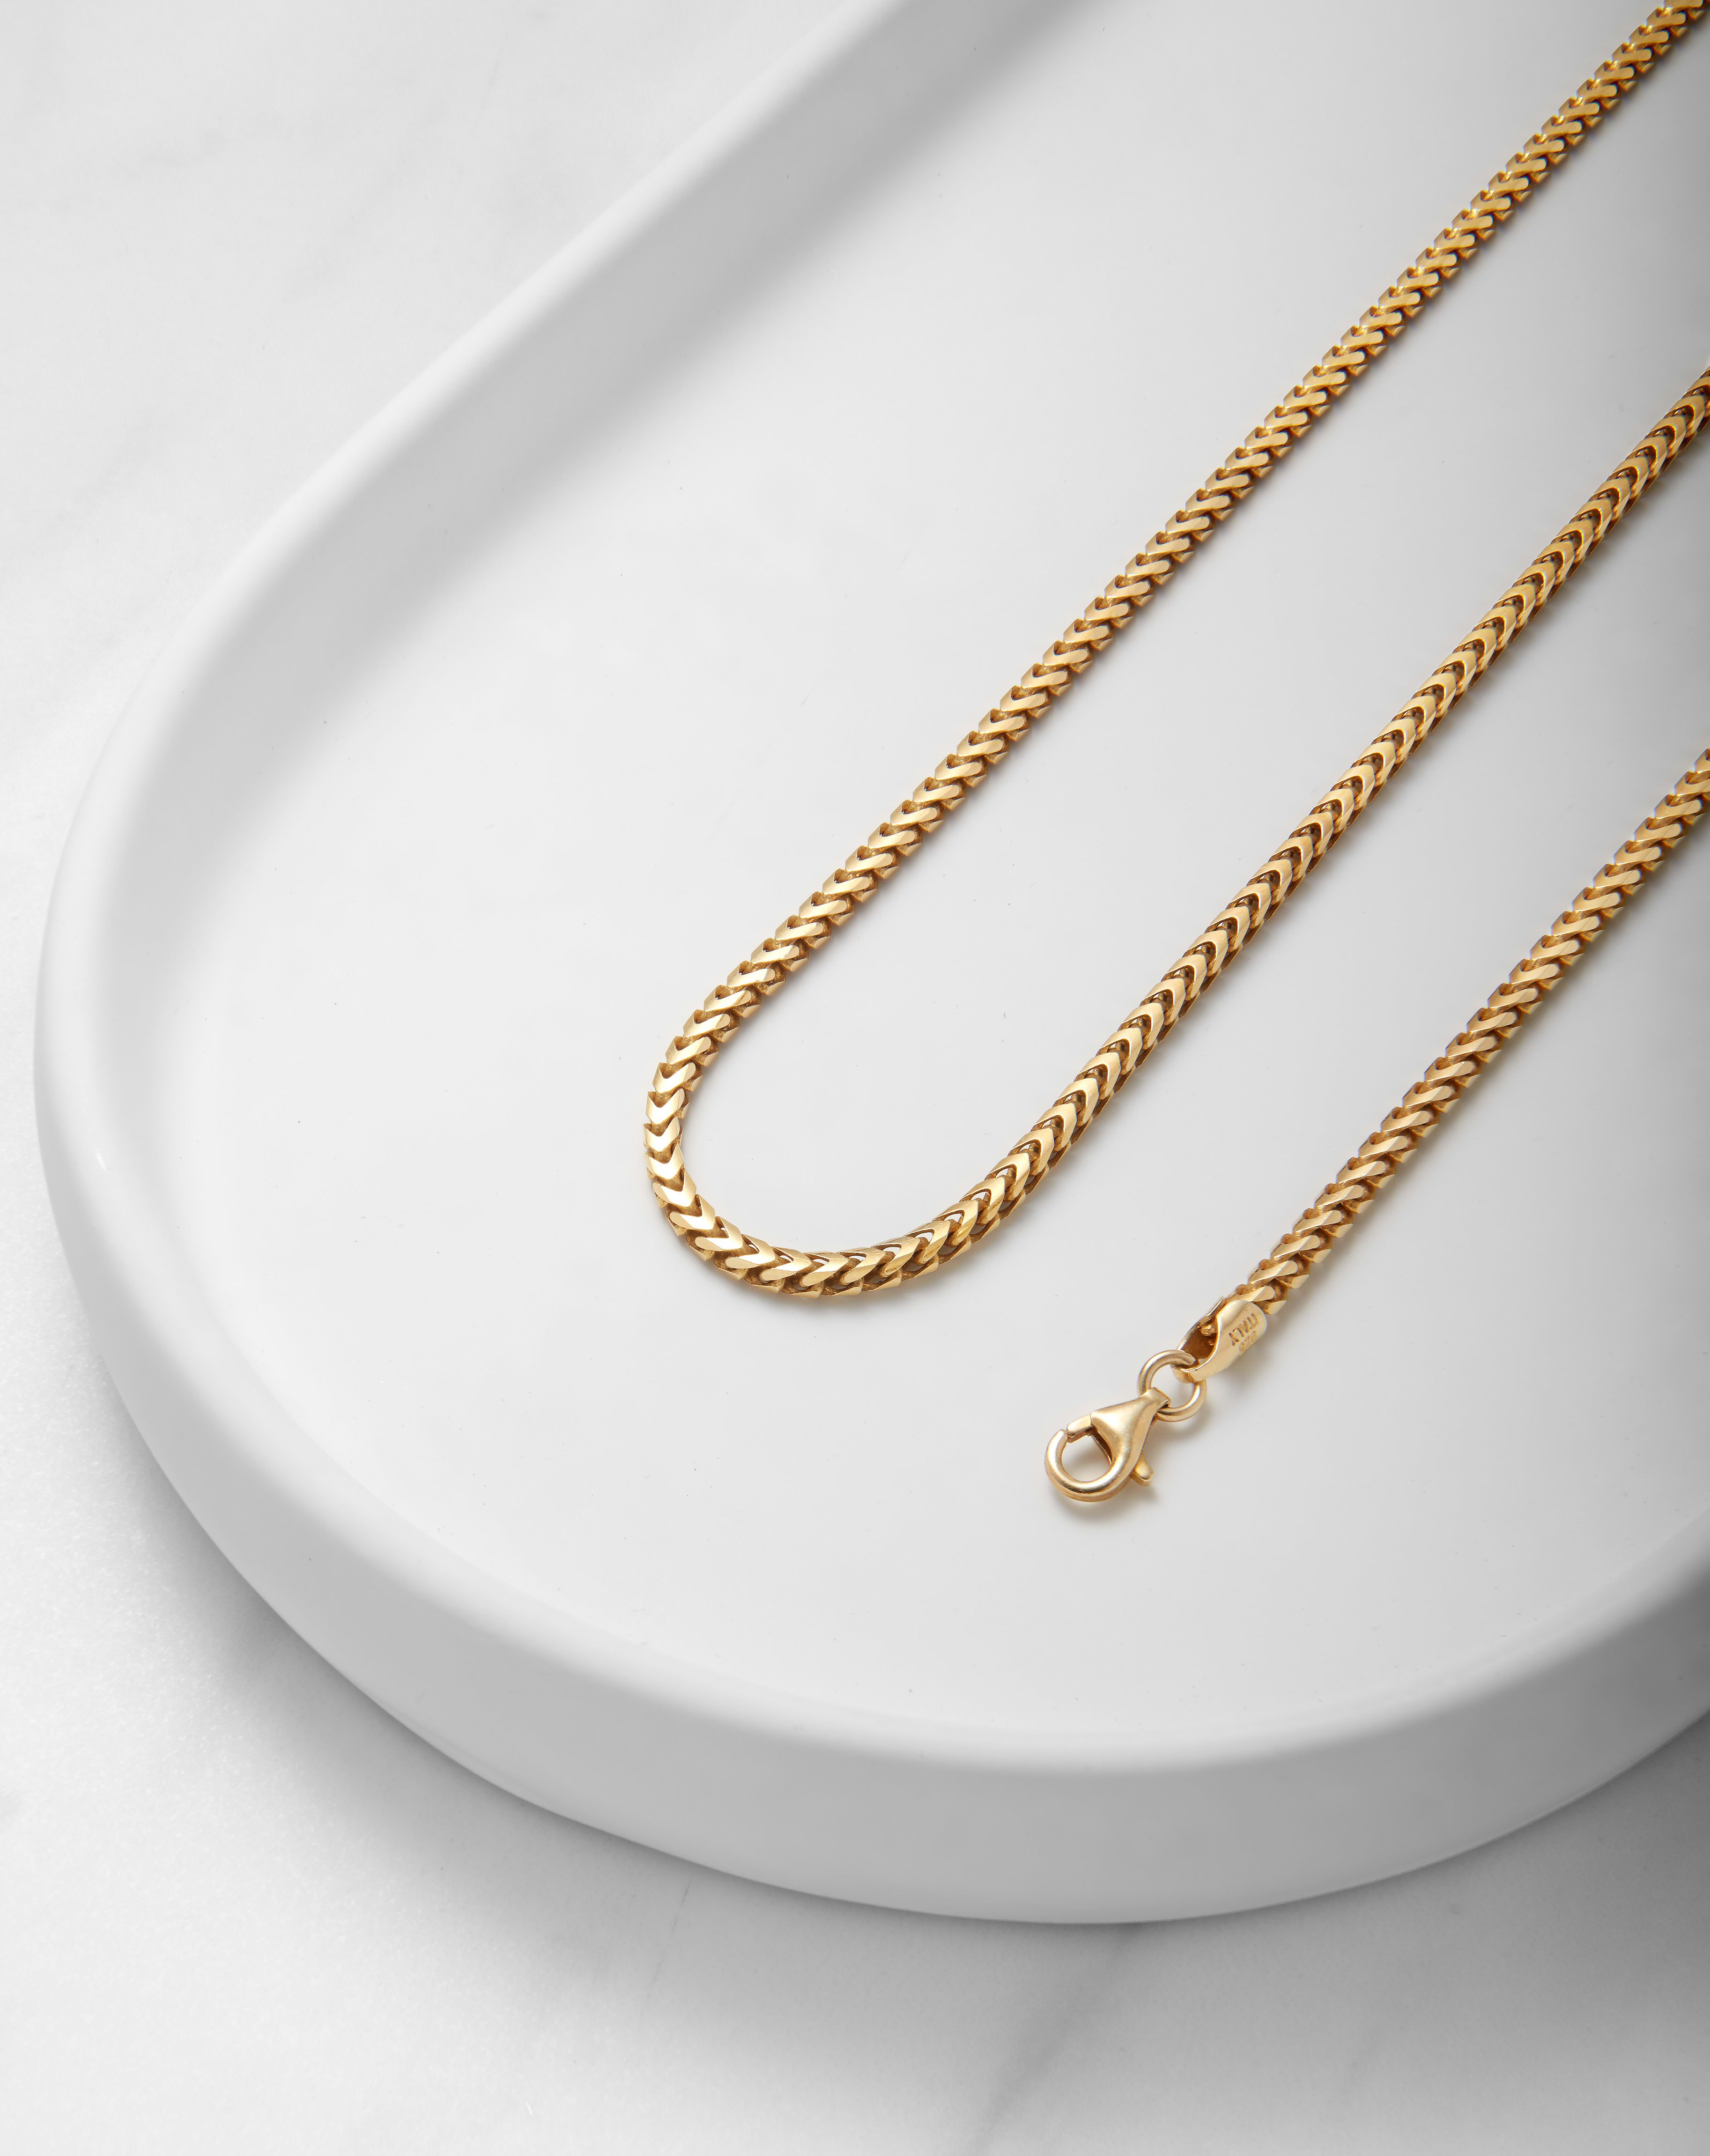 Image Franco Chain - 3mm Gold - Made With Precious Metals